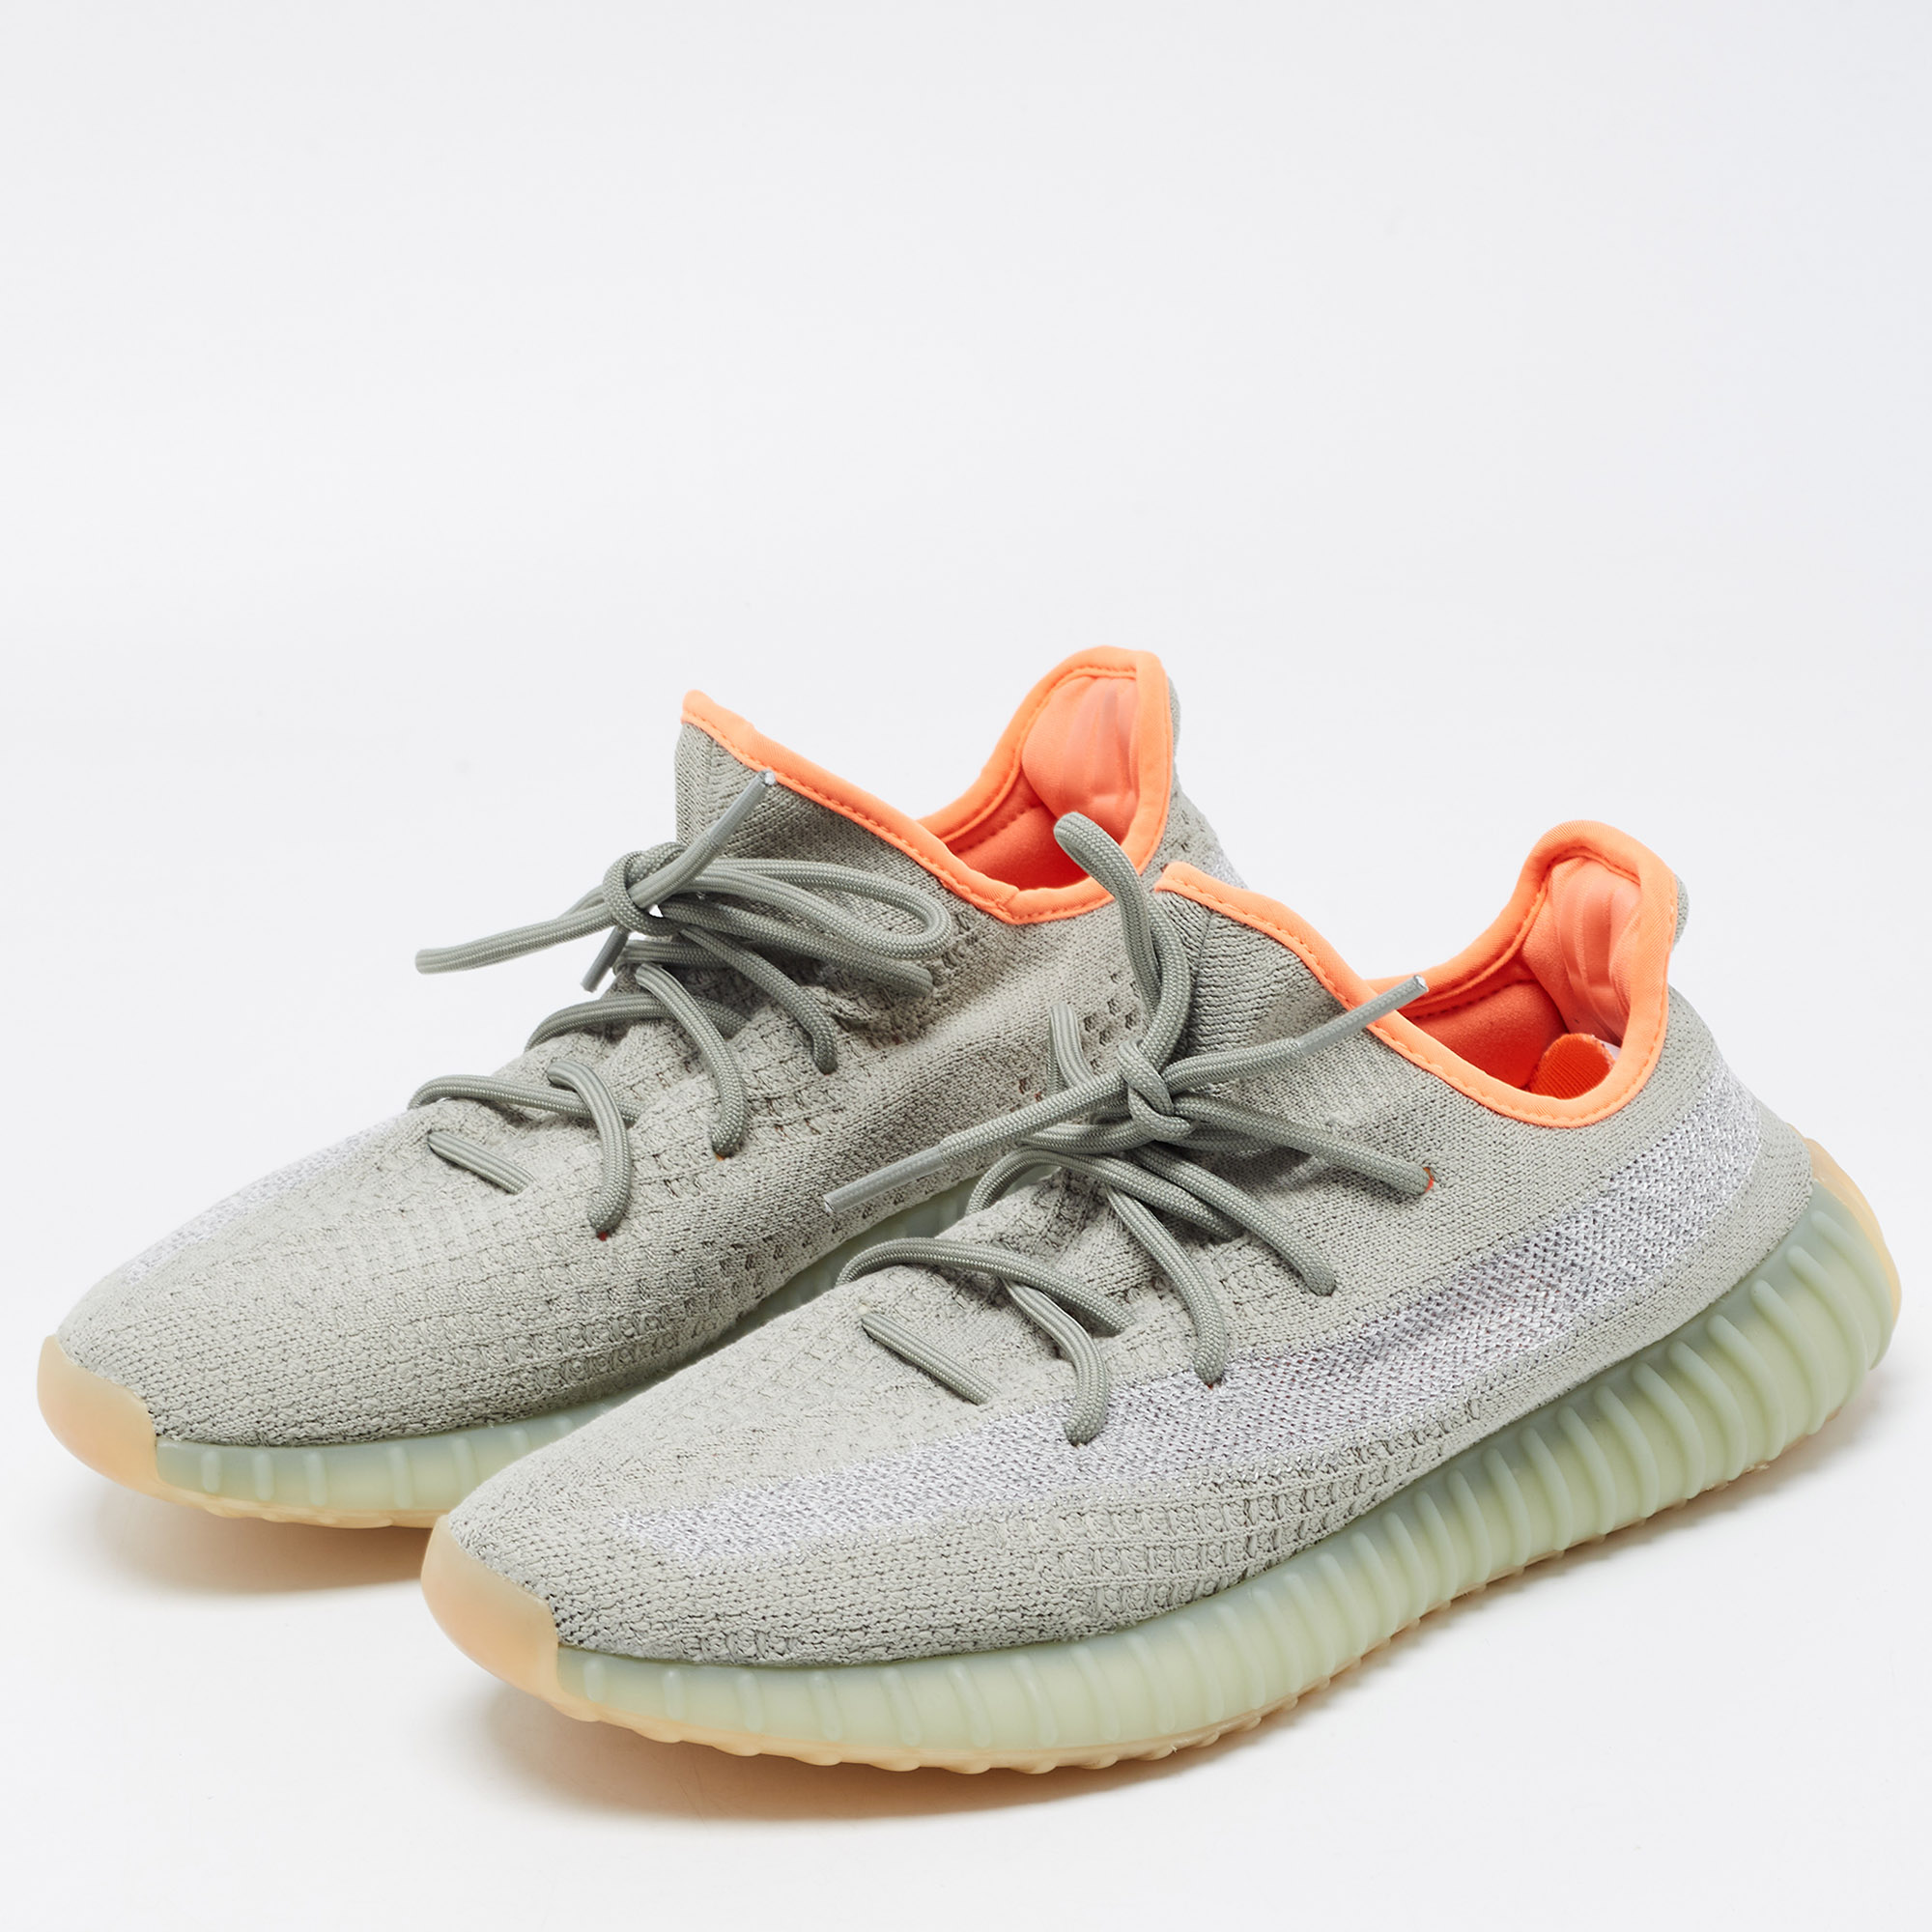 

Yeezy x Adidas Green/Grey Knit Fabric Boost 350 V2 Desert Sage Sneakers Size 44 2/3